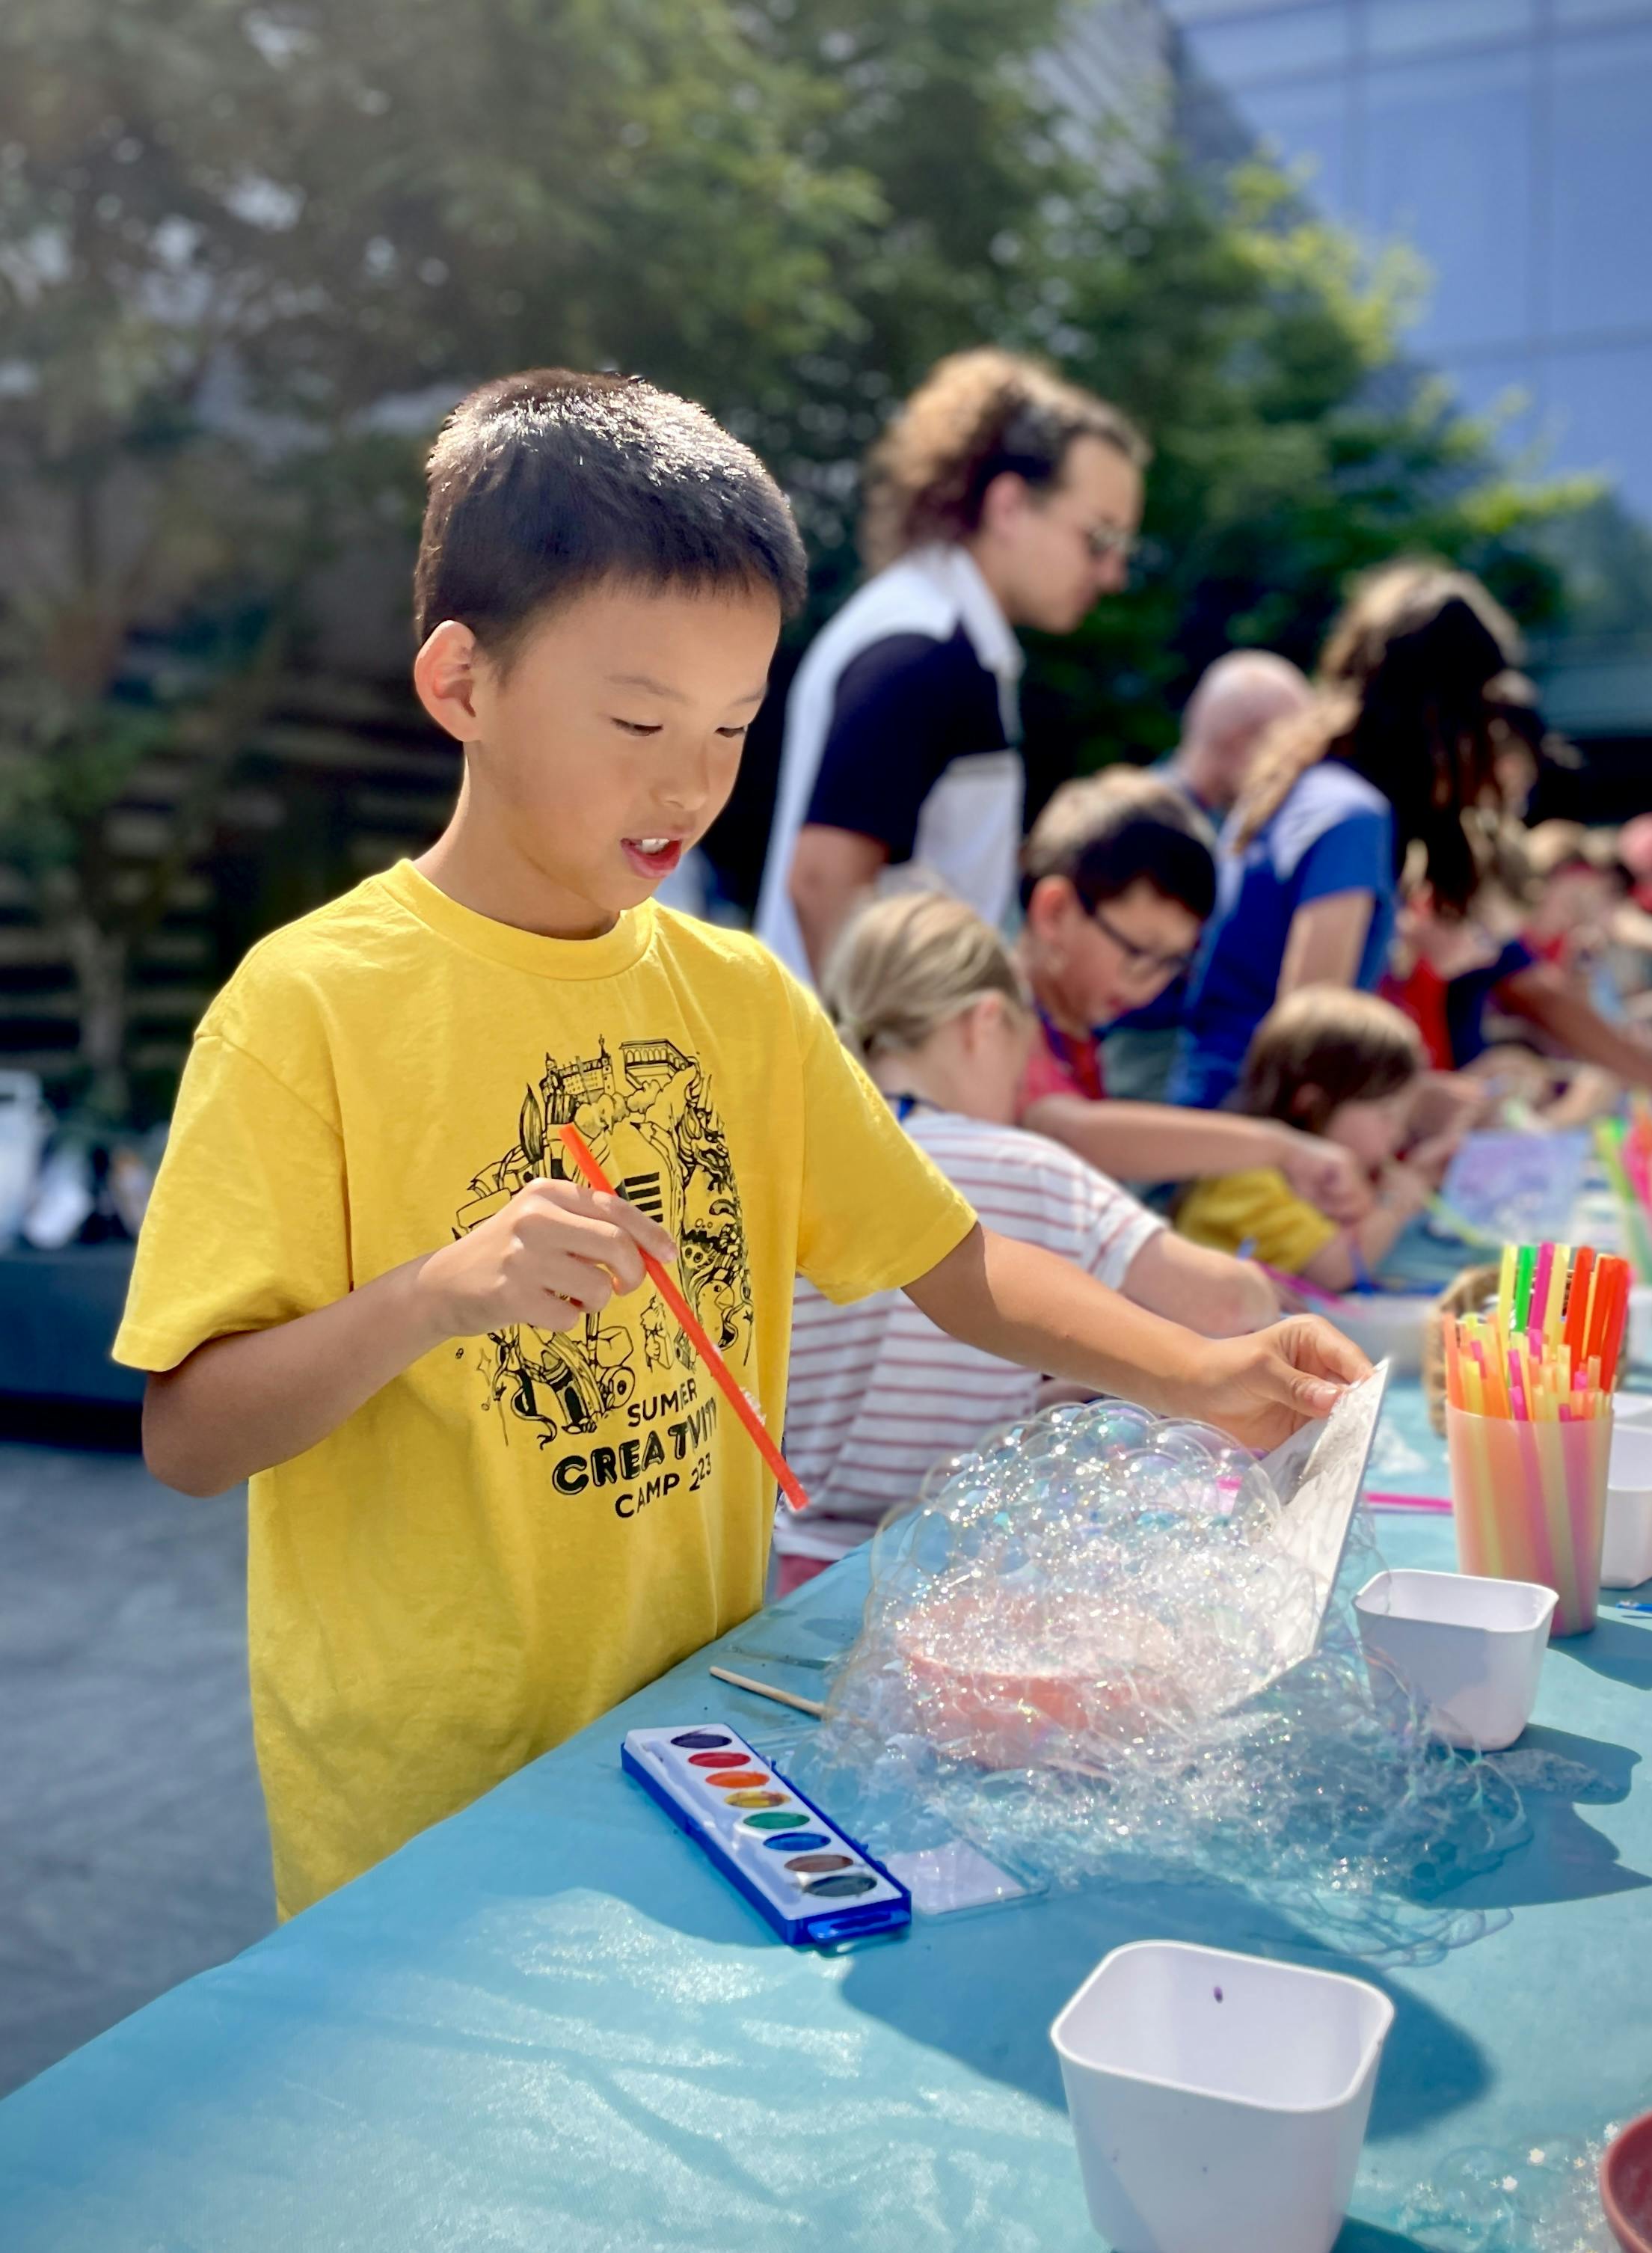 Child making bubble art painting project standing at a table outside